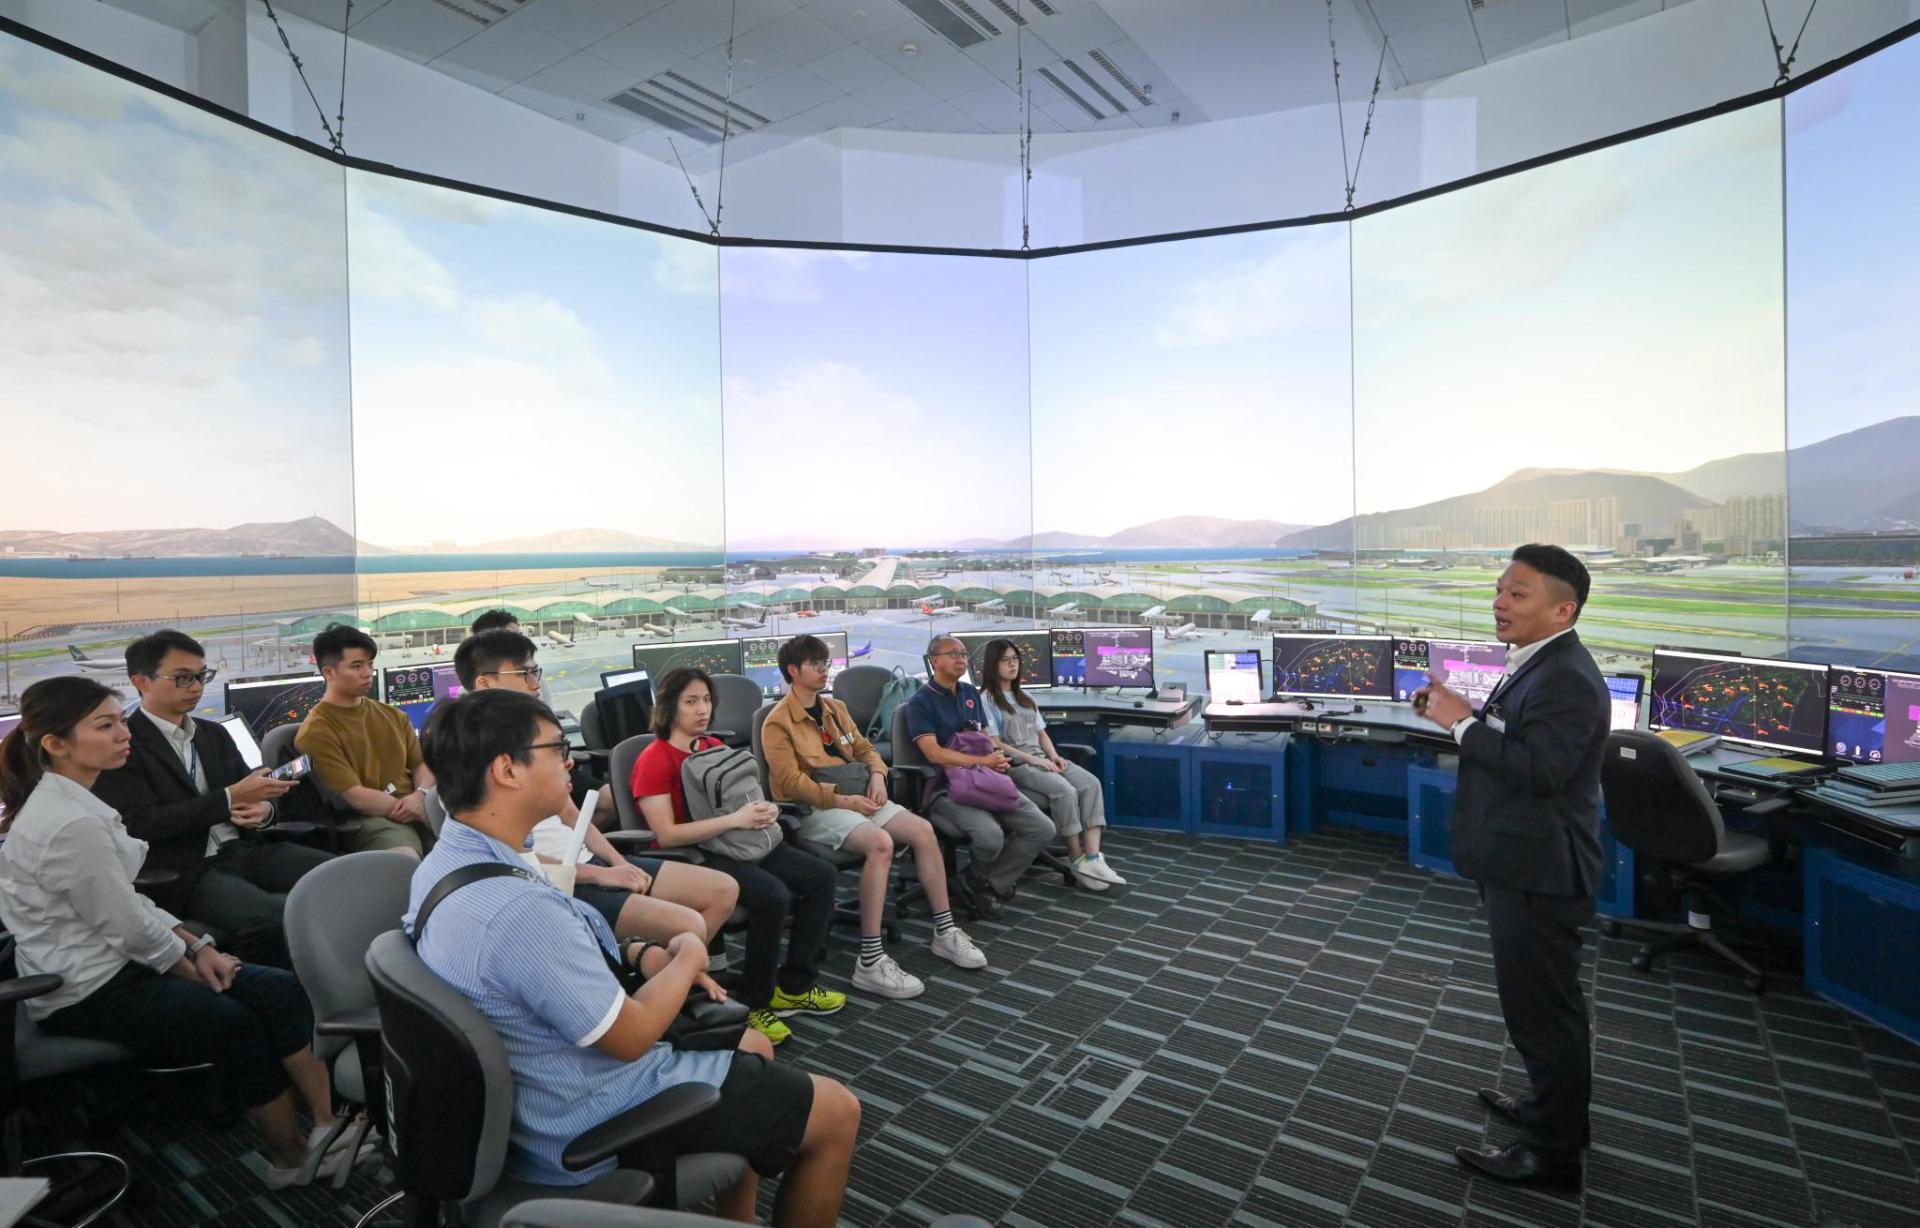 The Civil Aviation Department (CAD) held a Career Open Day today (April 21). Air traffic control tower simulator demonstration sessions at the Career Open Day enabled students to experience life as an air traffic control officer who works in the air traffic control tower.